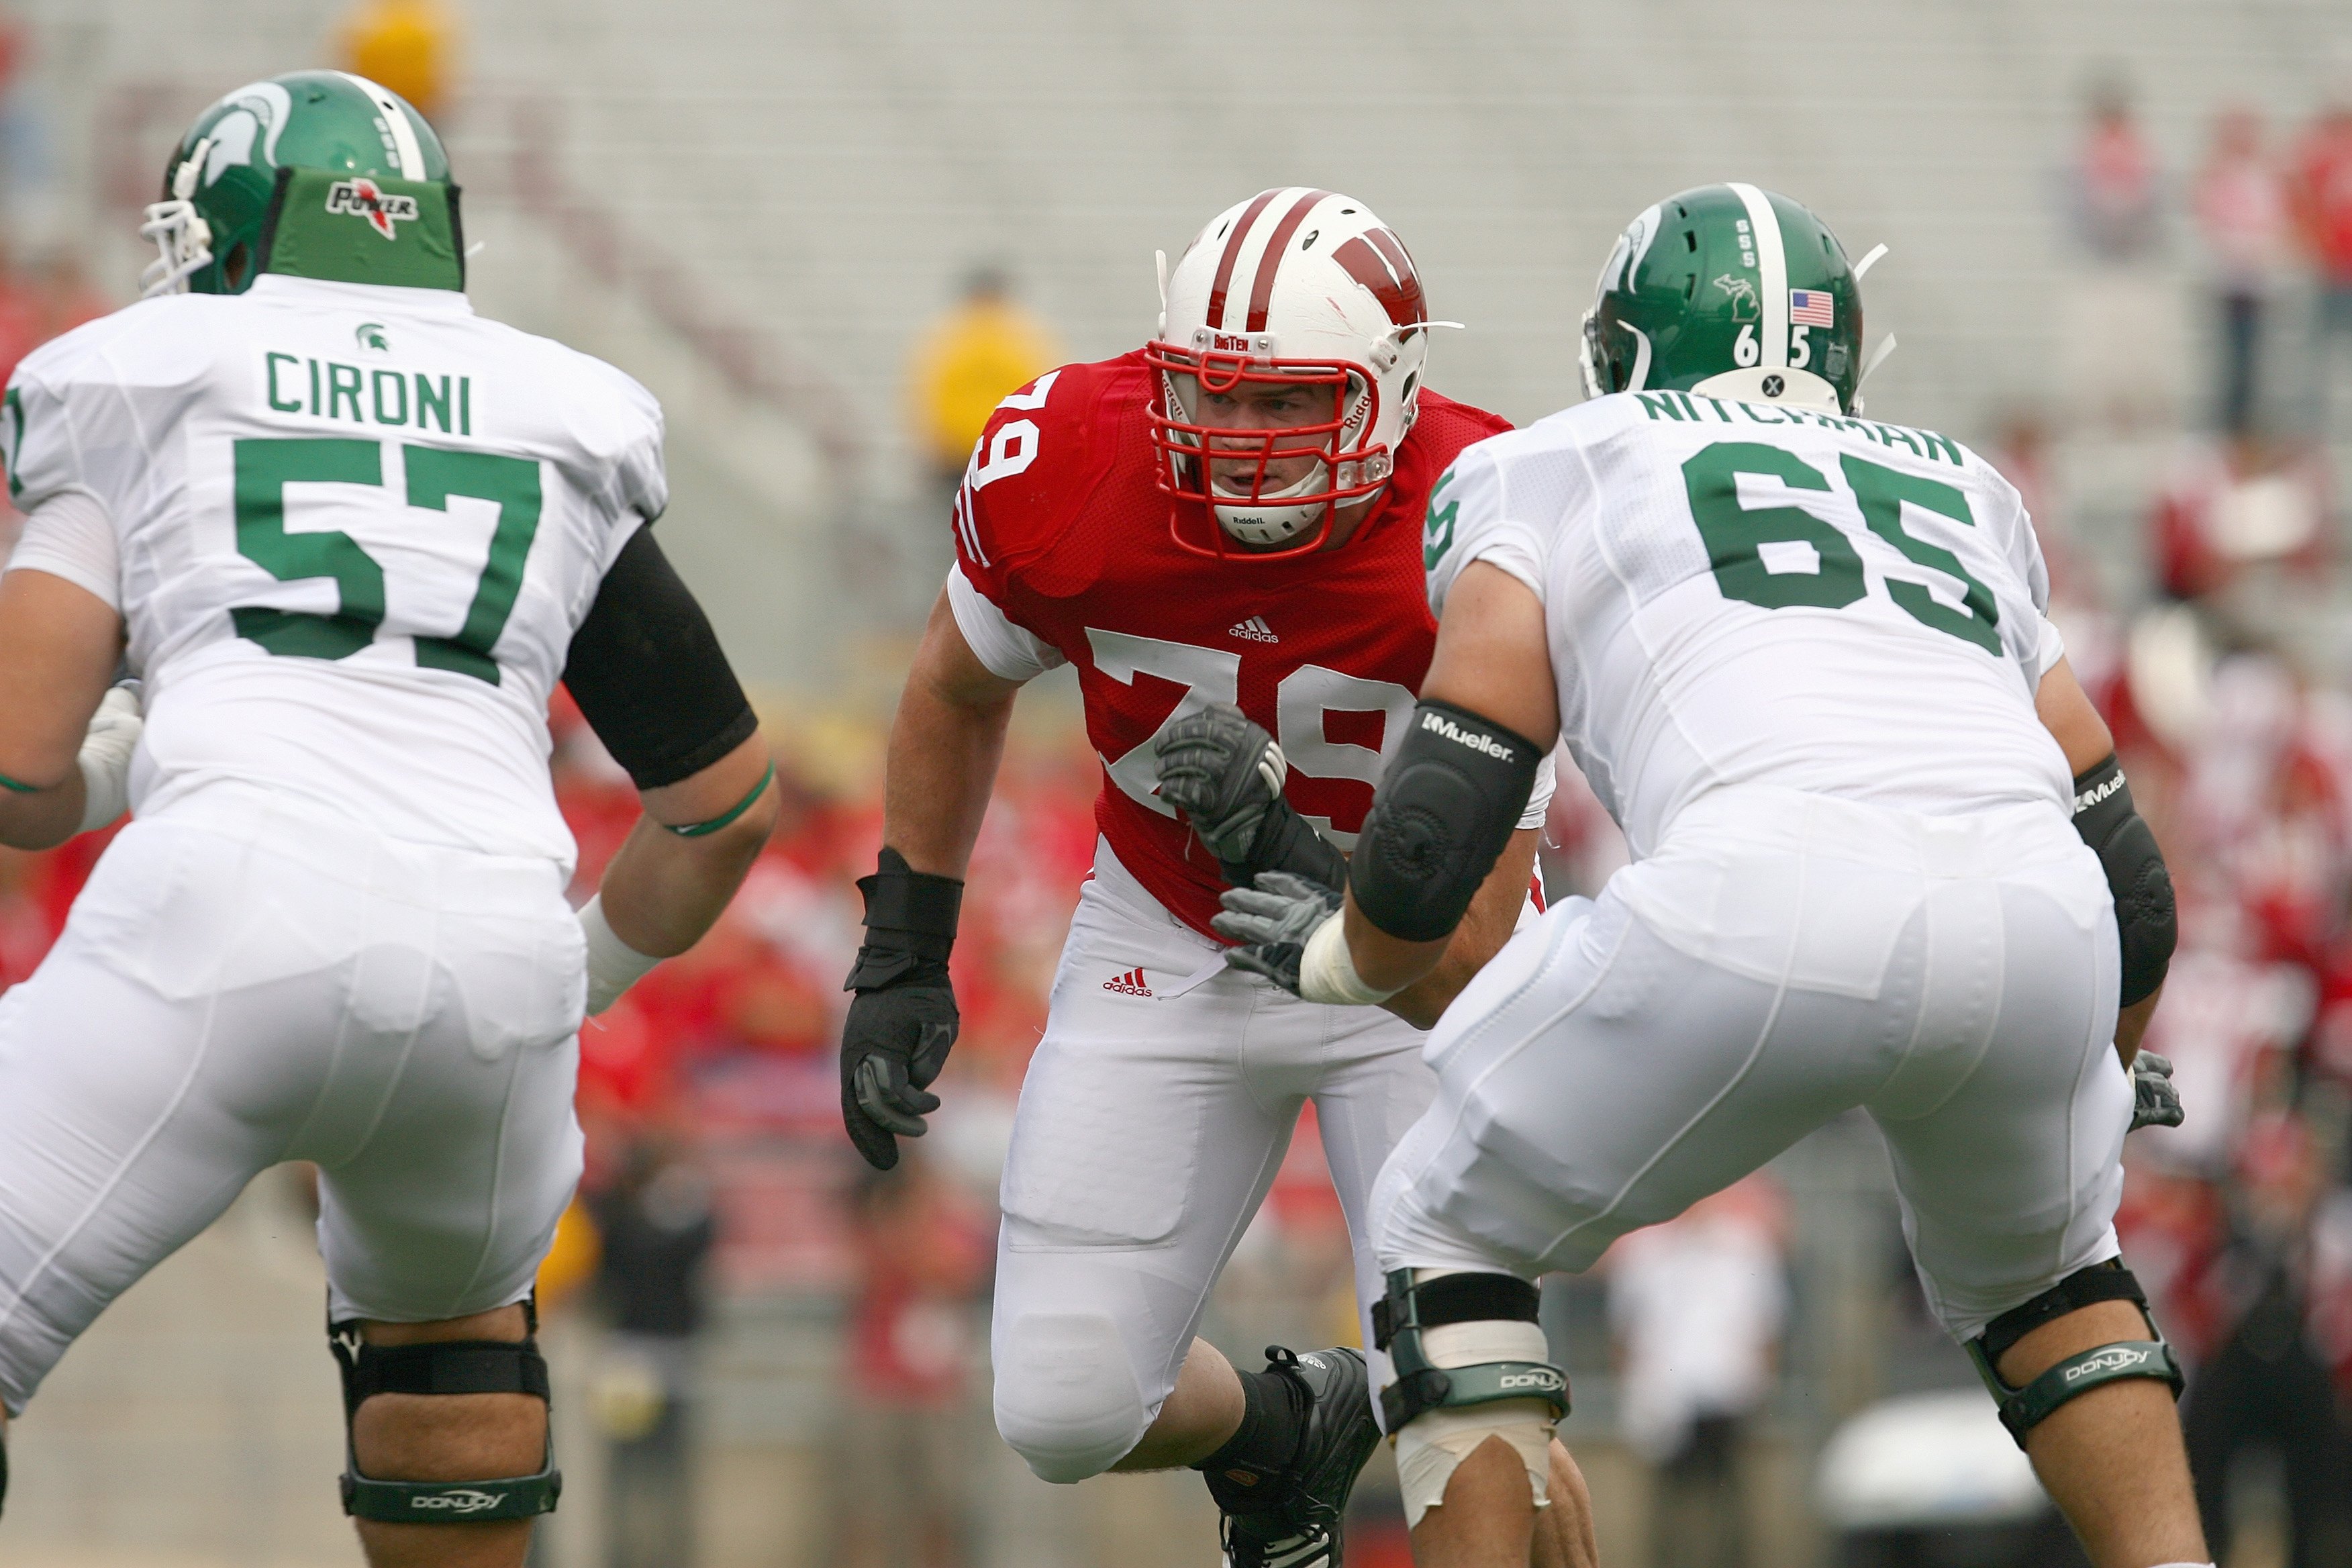 MADISON, WI - SEPTEMBER 26: Jeff Stehle #79 of the Wisconsin Badgers moves off the line against the Michigan State Spartans on September 26, 2009 at Camp Randall Stadium in Madison, Wisconsin. (Photo by Jonathan Daniel/Getty Images)